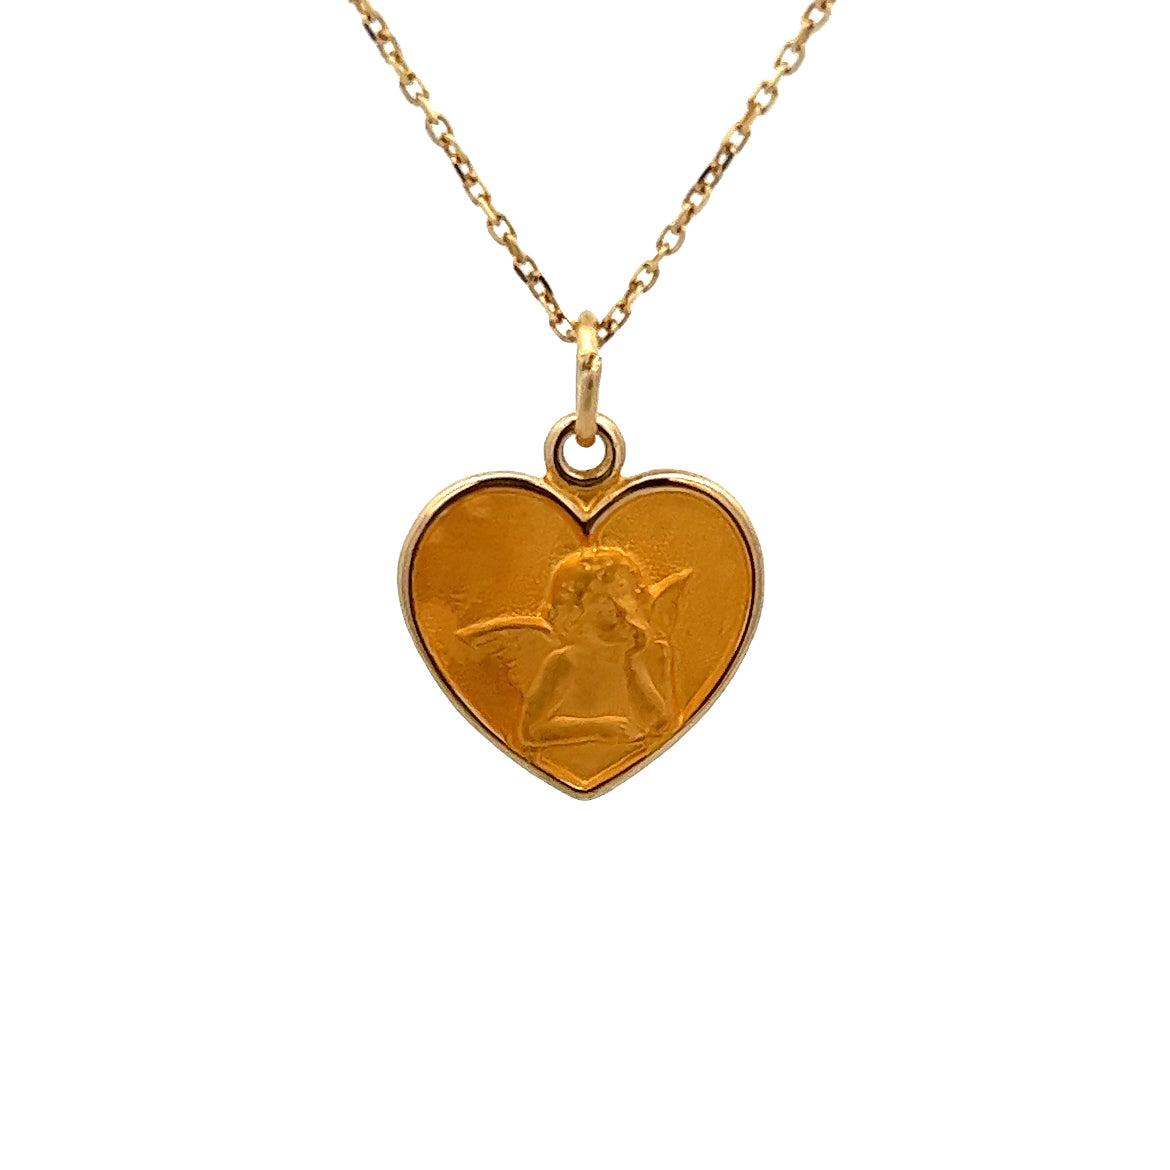 14K GOLD HEART WITH ANGEL MEDAL